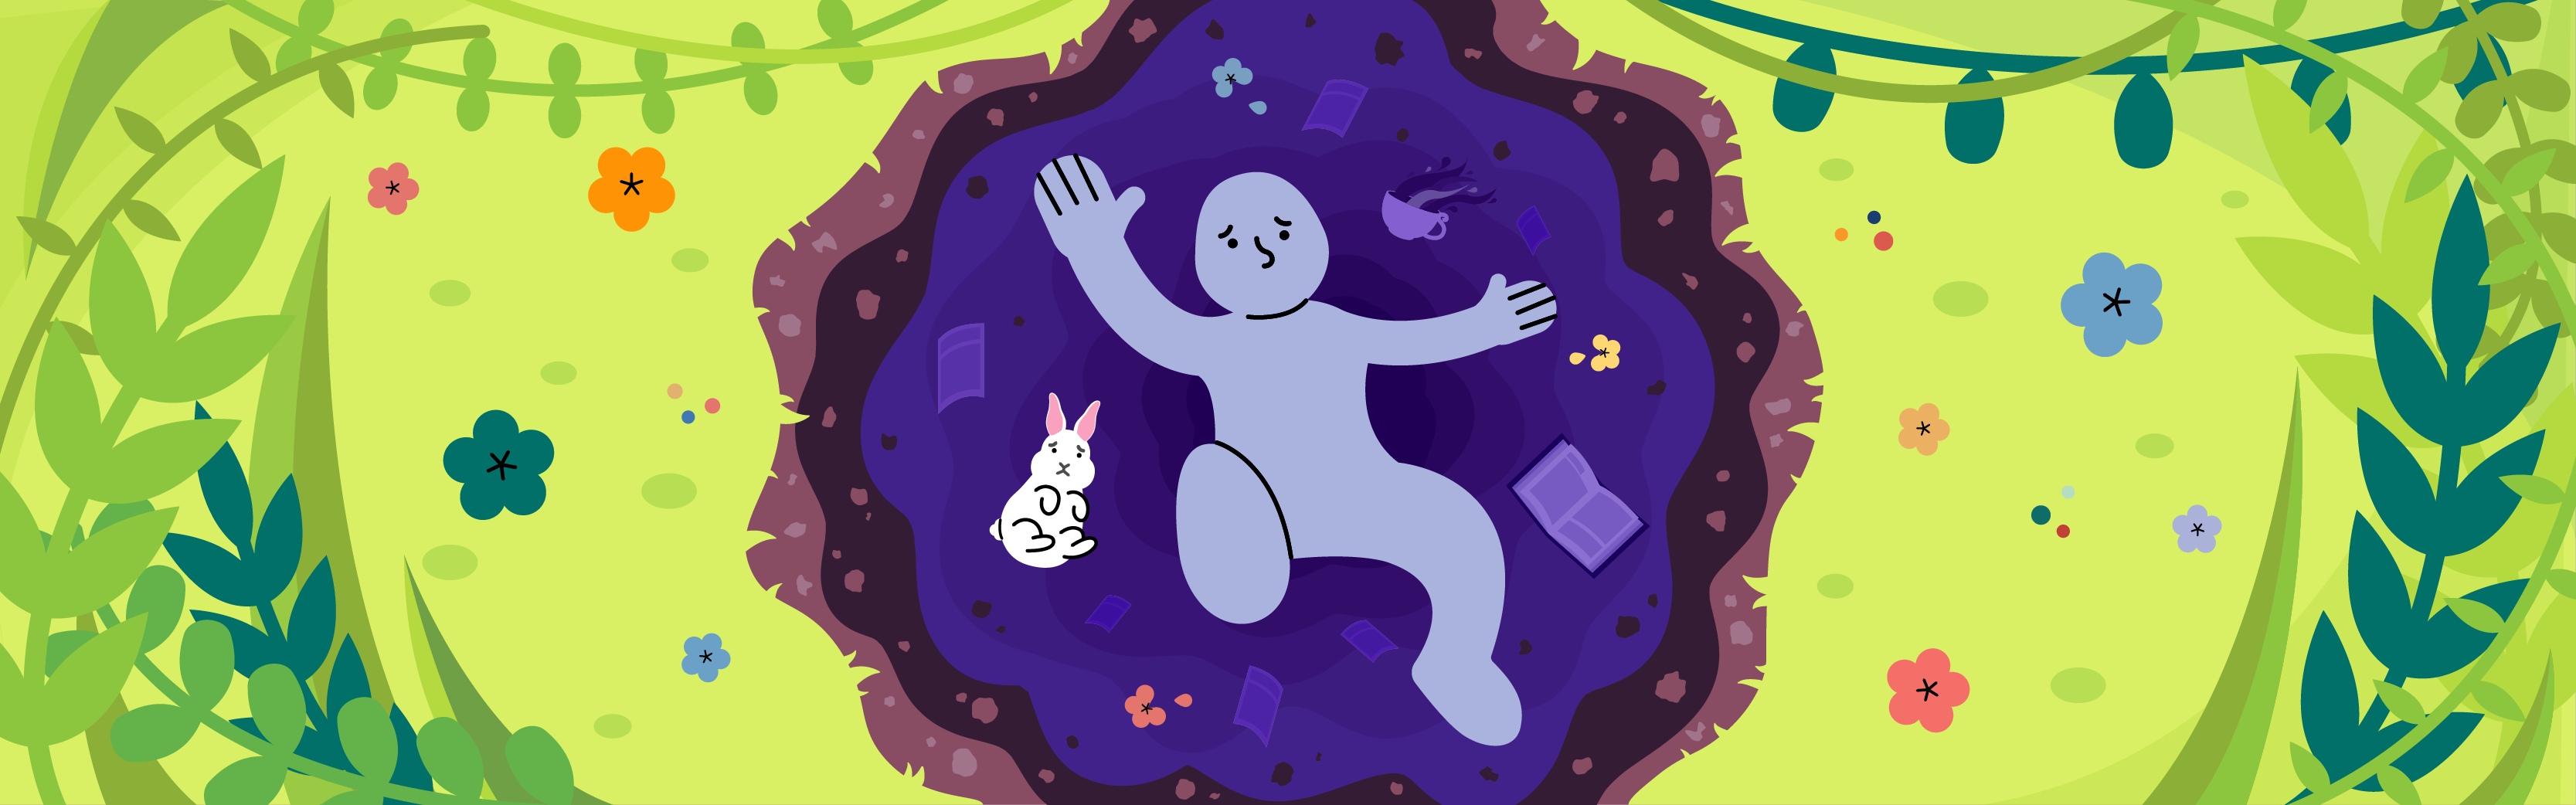 Graphic of person falling down rabbit hole